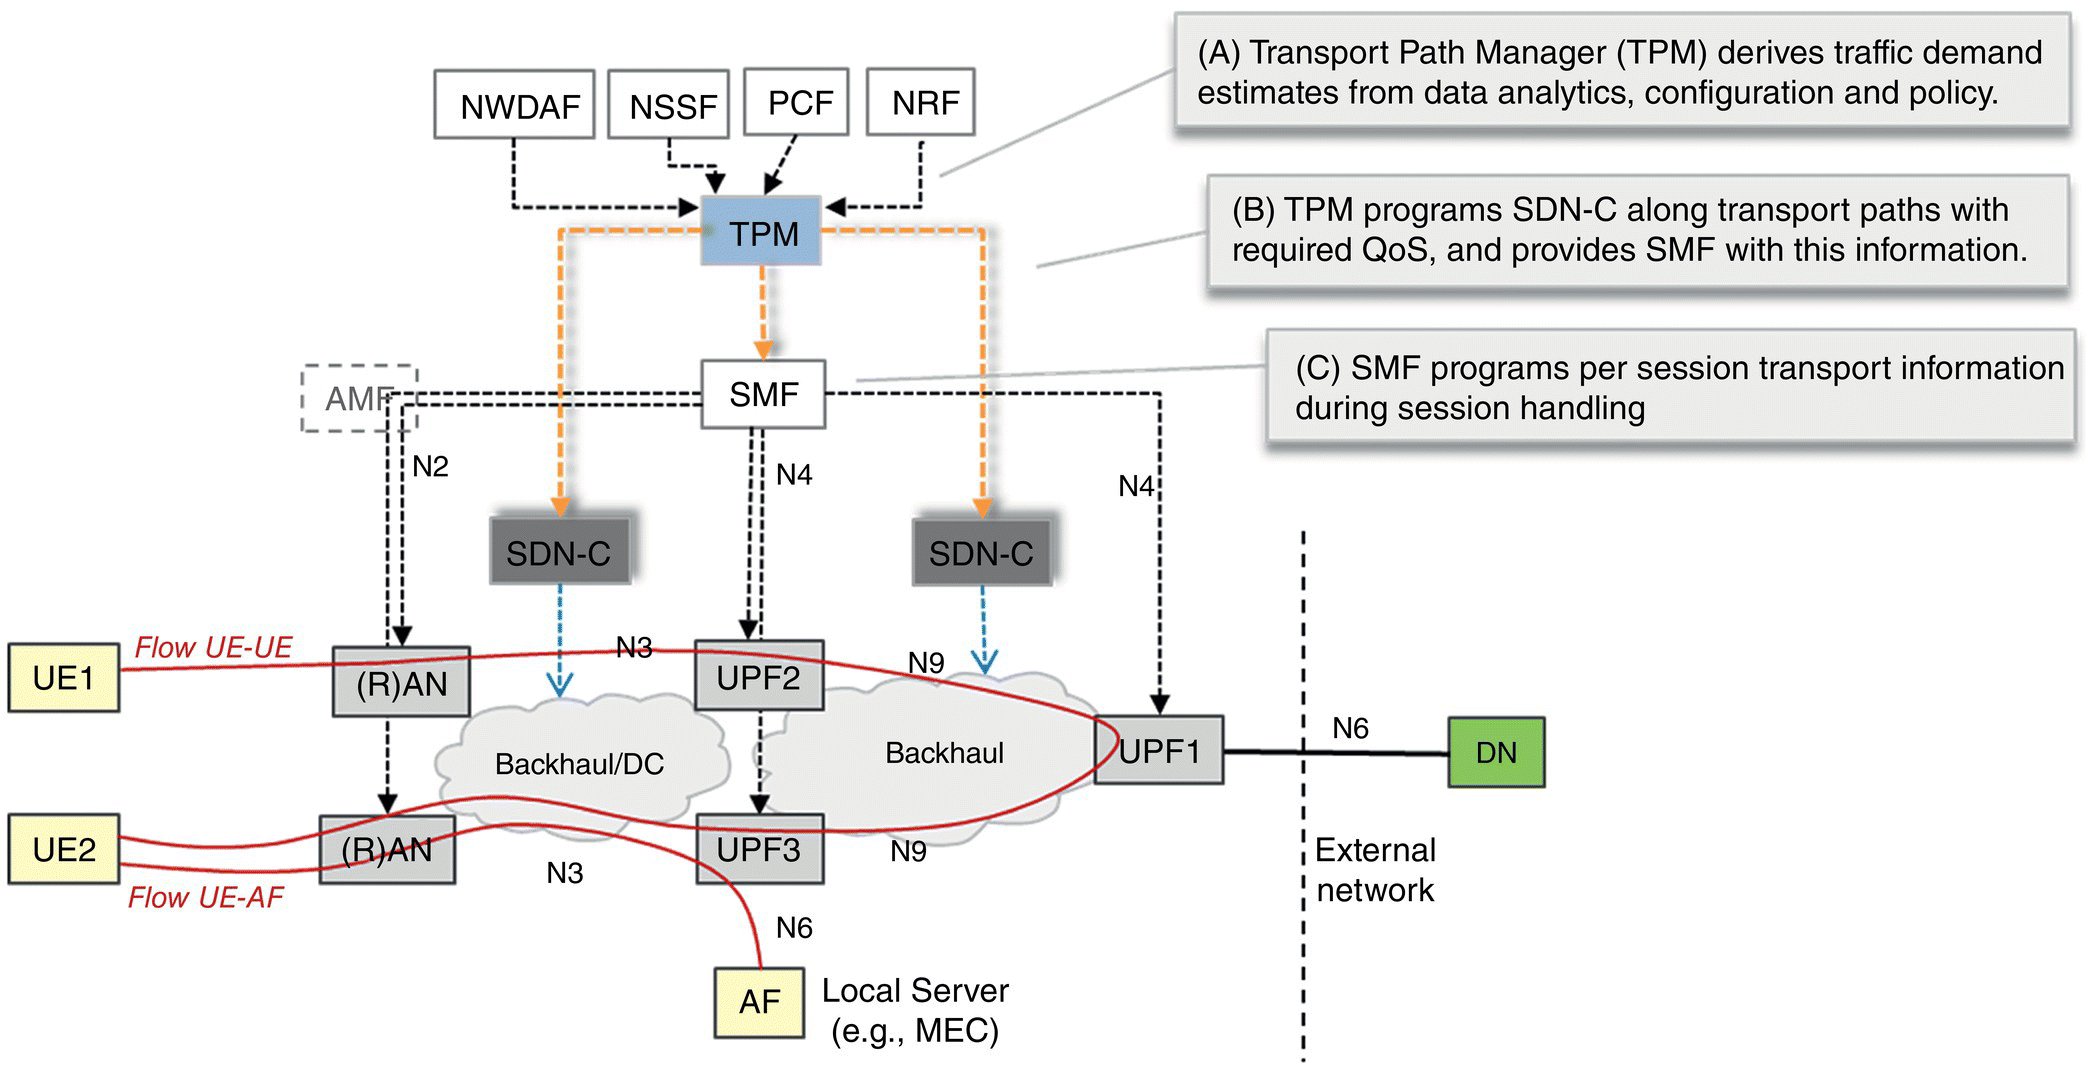 Schematic diagram illustrating transport path management with 4 boxes at the top for NWDAF, NSSF, PCF, and NRF linking to TPM, to SMF, to SDN-C, to (R)AN, UPF2, etc. leading to (R)An and UPF3, etc.